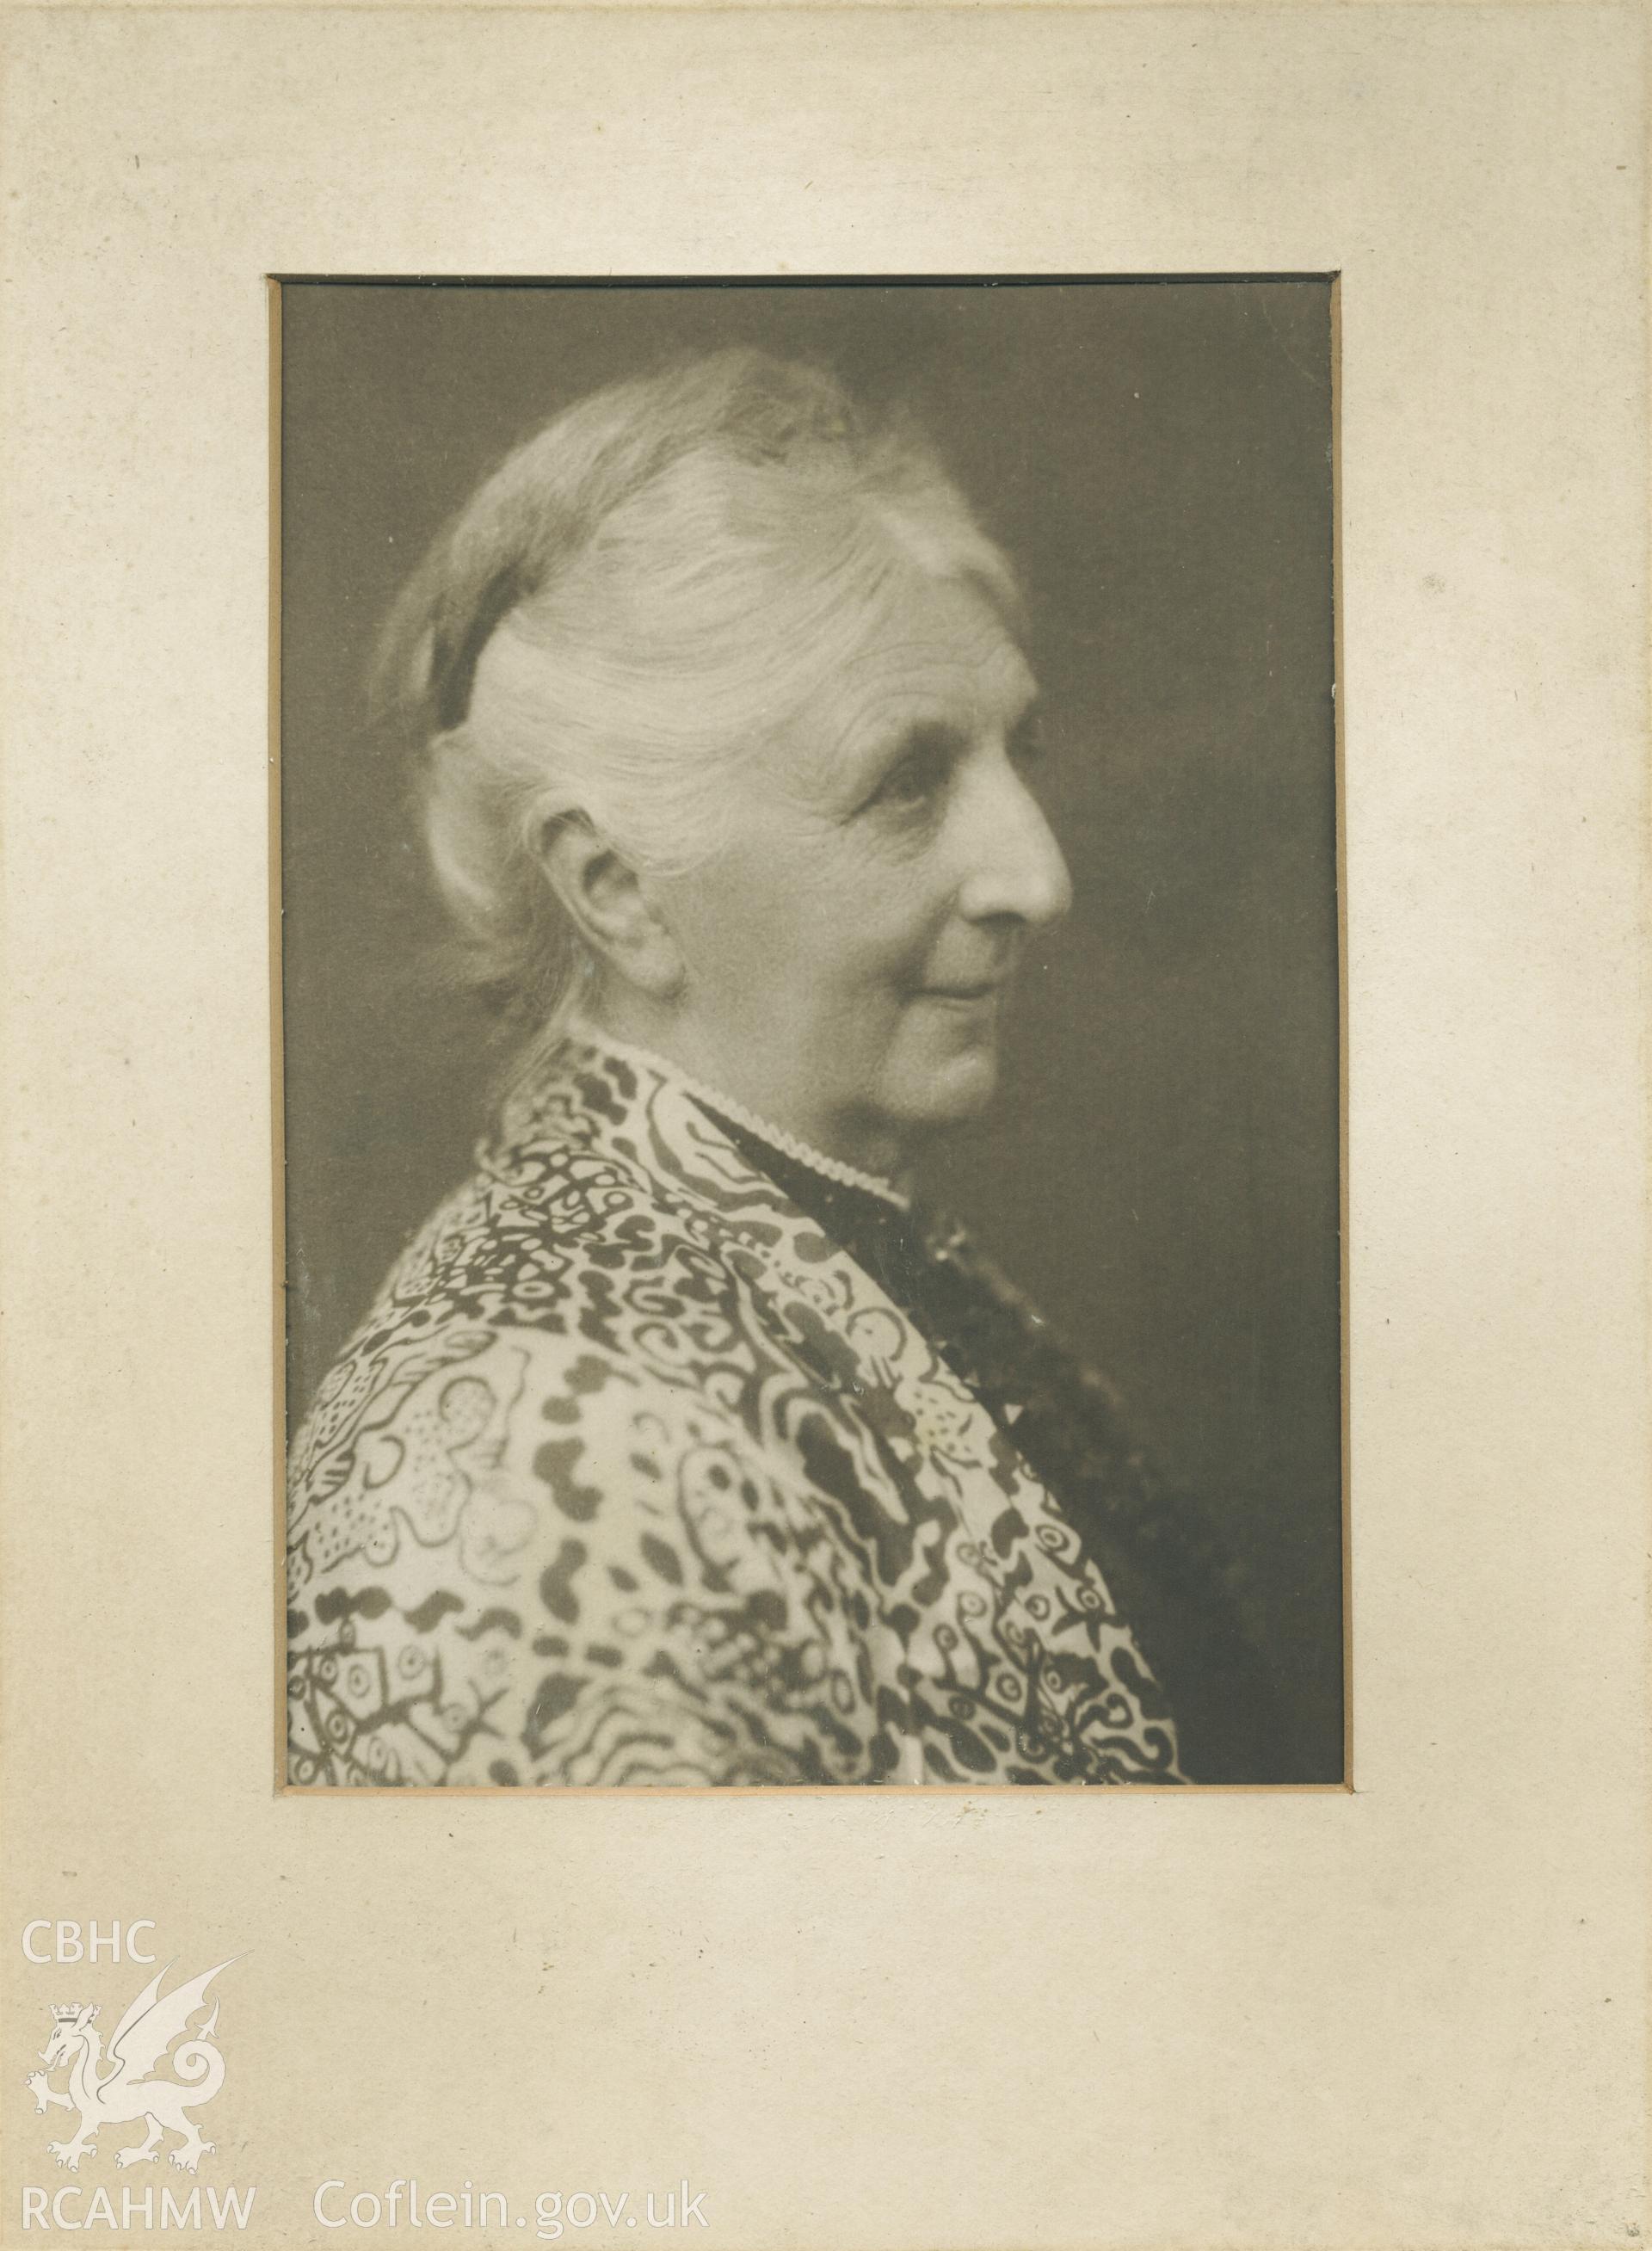 Black and white photograph of Mrs Jones (Gelli-yr-Halen) - she laid the foundation stone for the new chapel (chosen because she was the oldest member). She used to pay for the annual tea . Donated to the RCAHMW during the Digital Dissent Project.